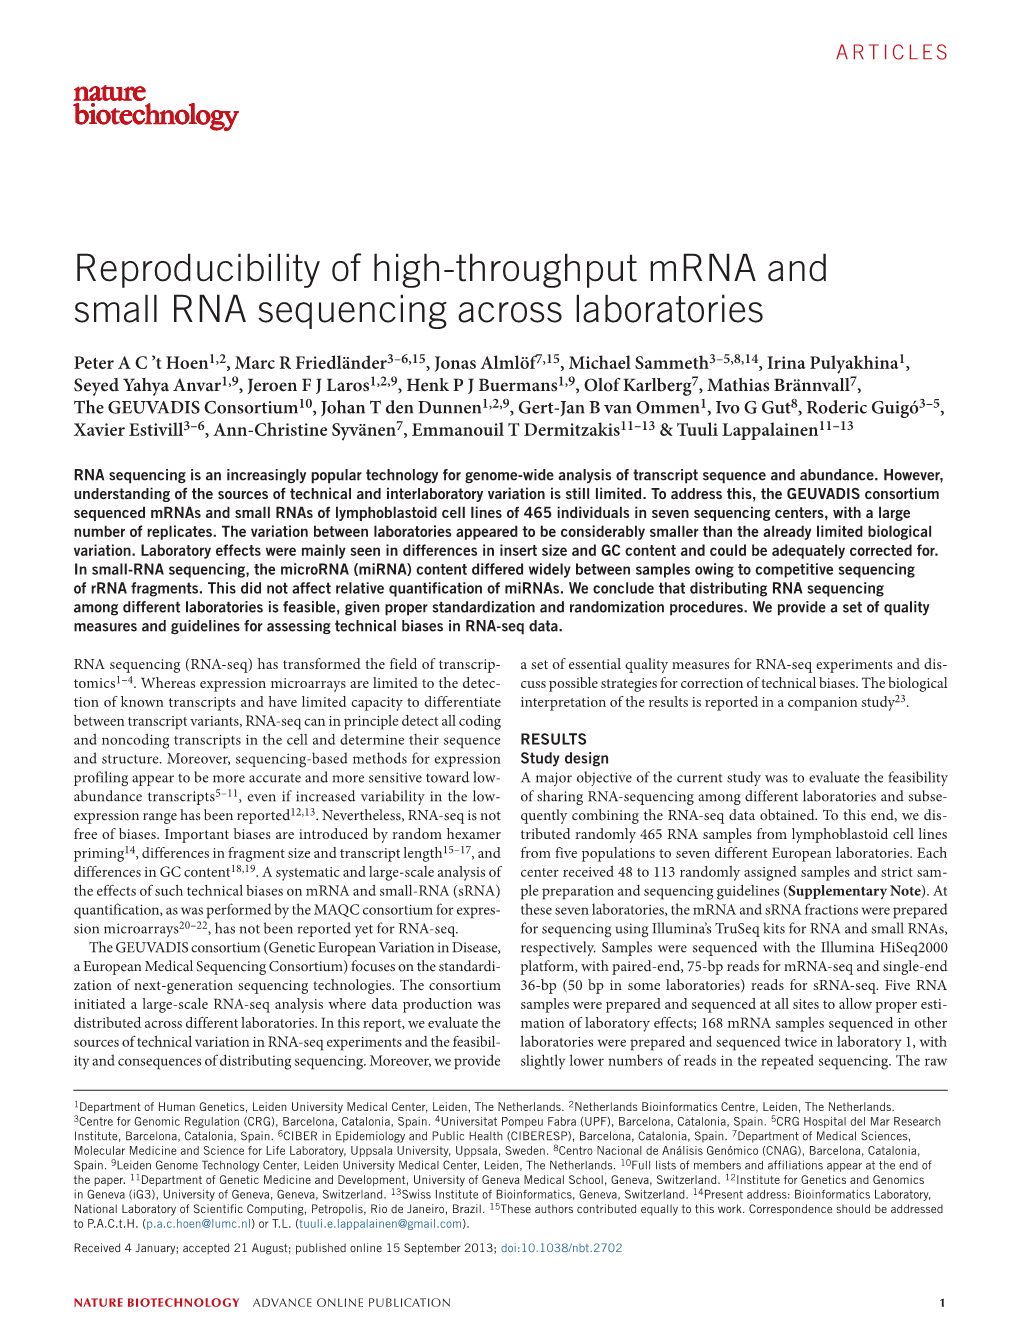 Reproducibility of High-Throughput Mrna and Small RNA Sequencing Across Laboratories